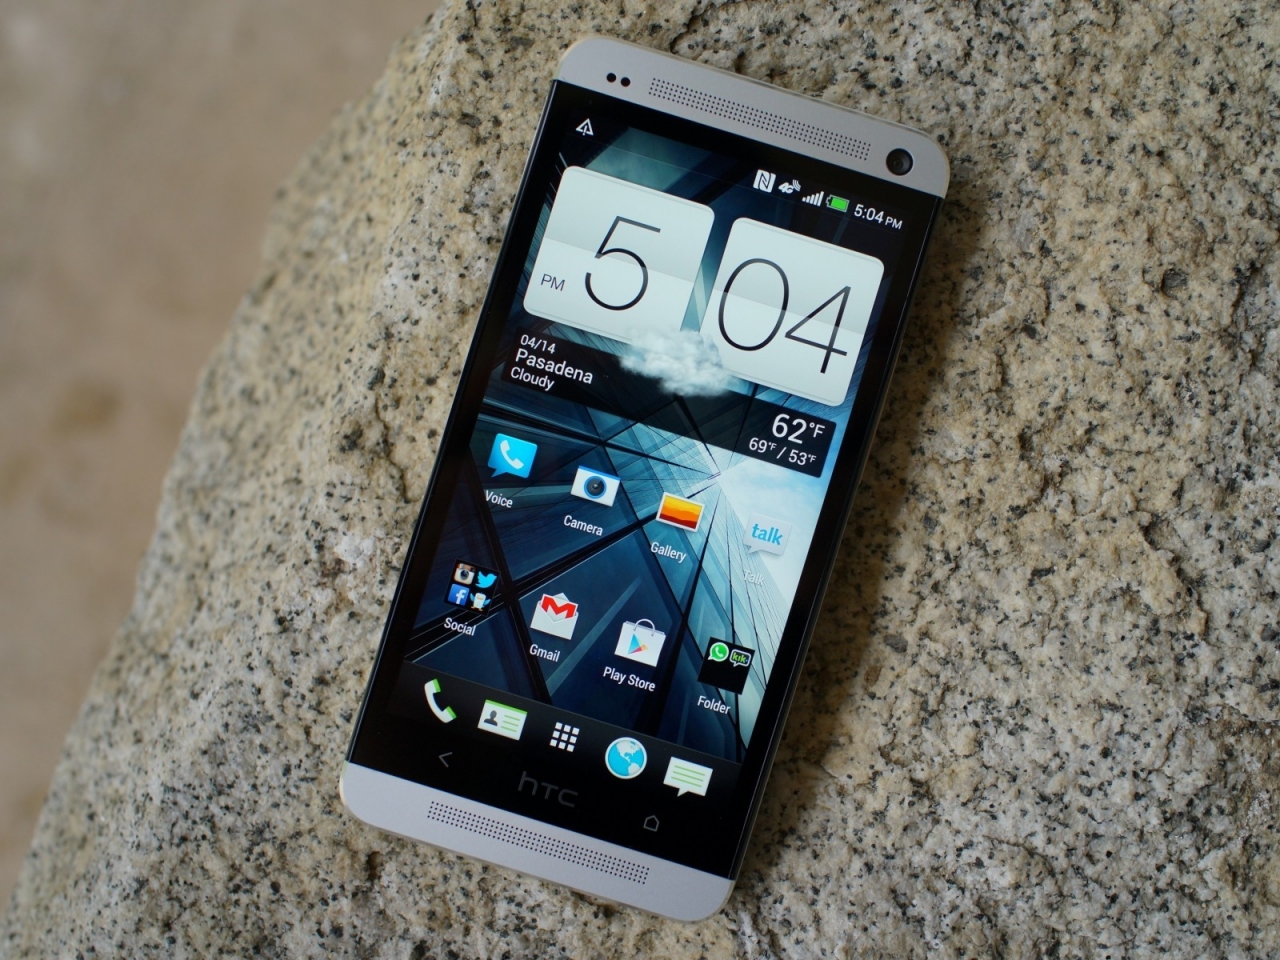 HTC One Device for 1280 x 960 resolution